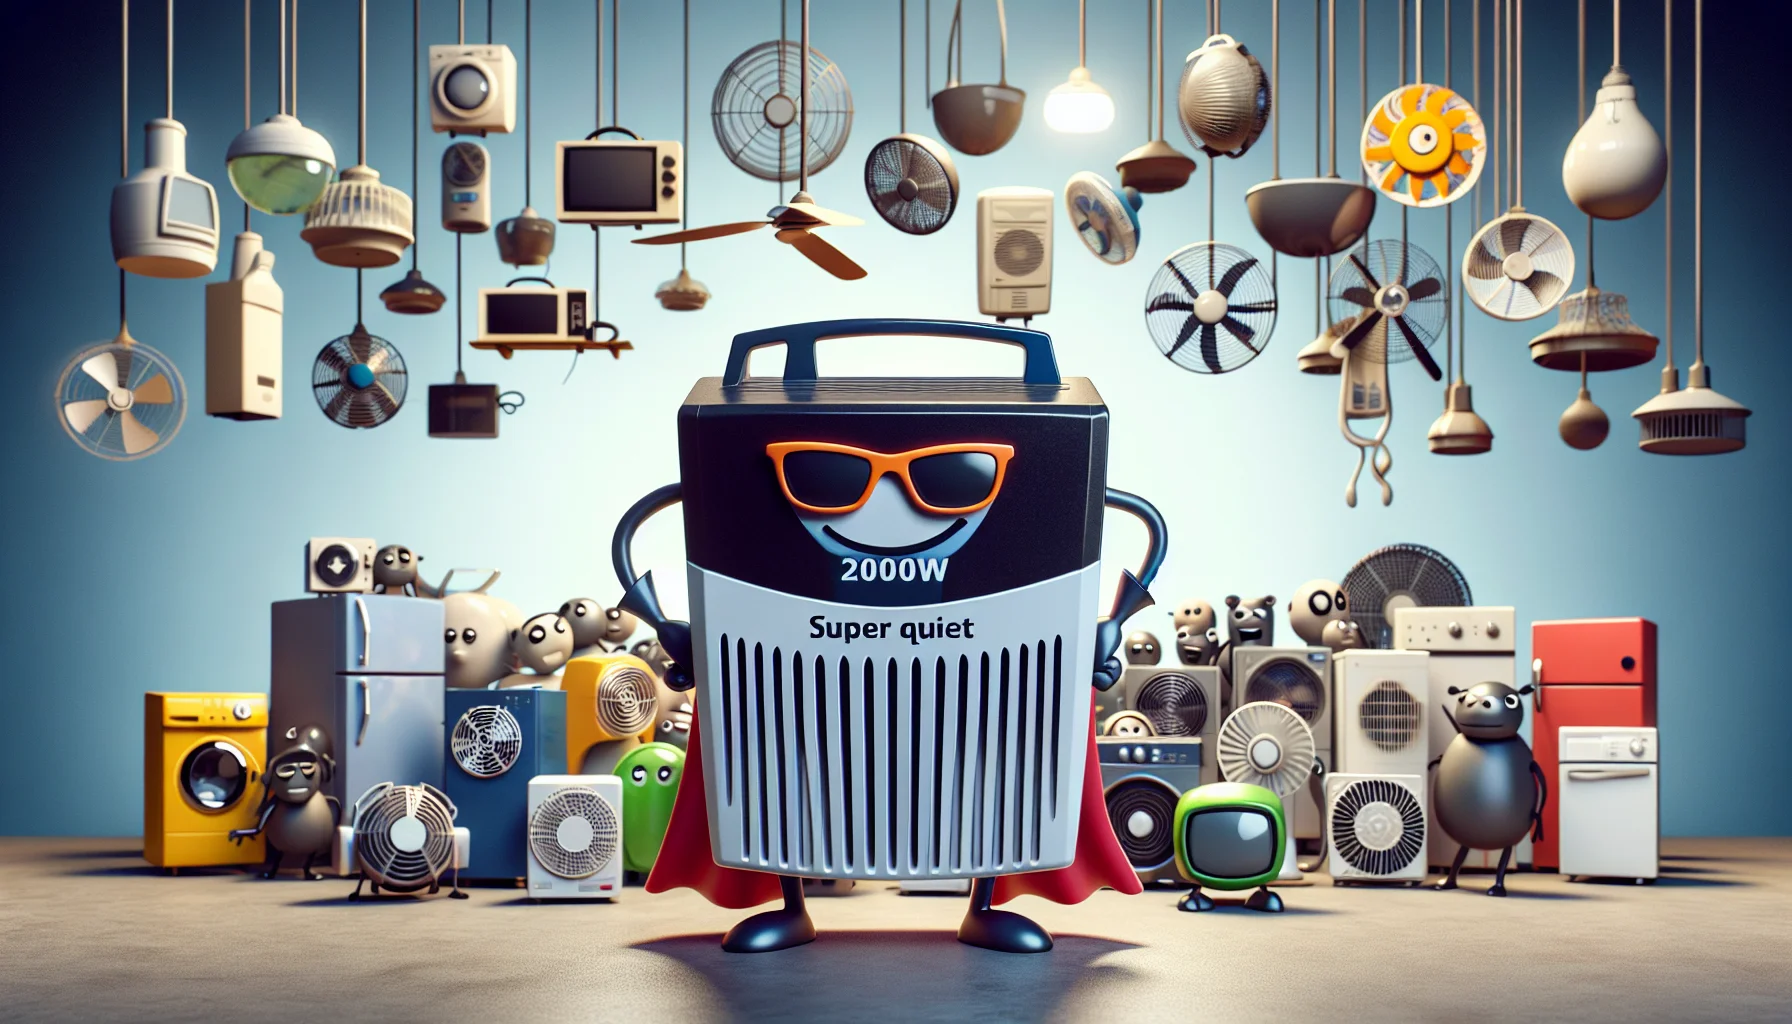 Imagine a whimsical scene centering on a generic 2000W Super Quiet Inverter, not associated with any specific brand. The inverter is comically accessorized with sunglasses and a cape, alluding to a superhero persona. It stands amidst a crowd of different domestic appliances like fridges, fans, televisions, all eager to be powered up. The appliances are anthropomorphic with comic expressions, eliciting laughter while subtly portraying their need for electricity. The inverter, appearing confident and ready, symbolizes its ability to meet their demands, thus encouraging the audience to harness electricity generation.